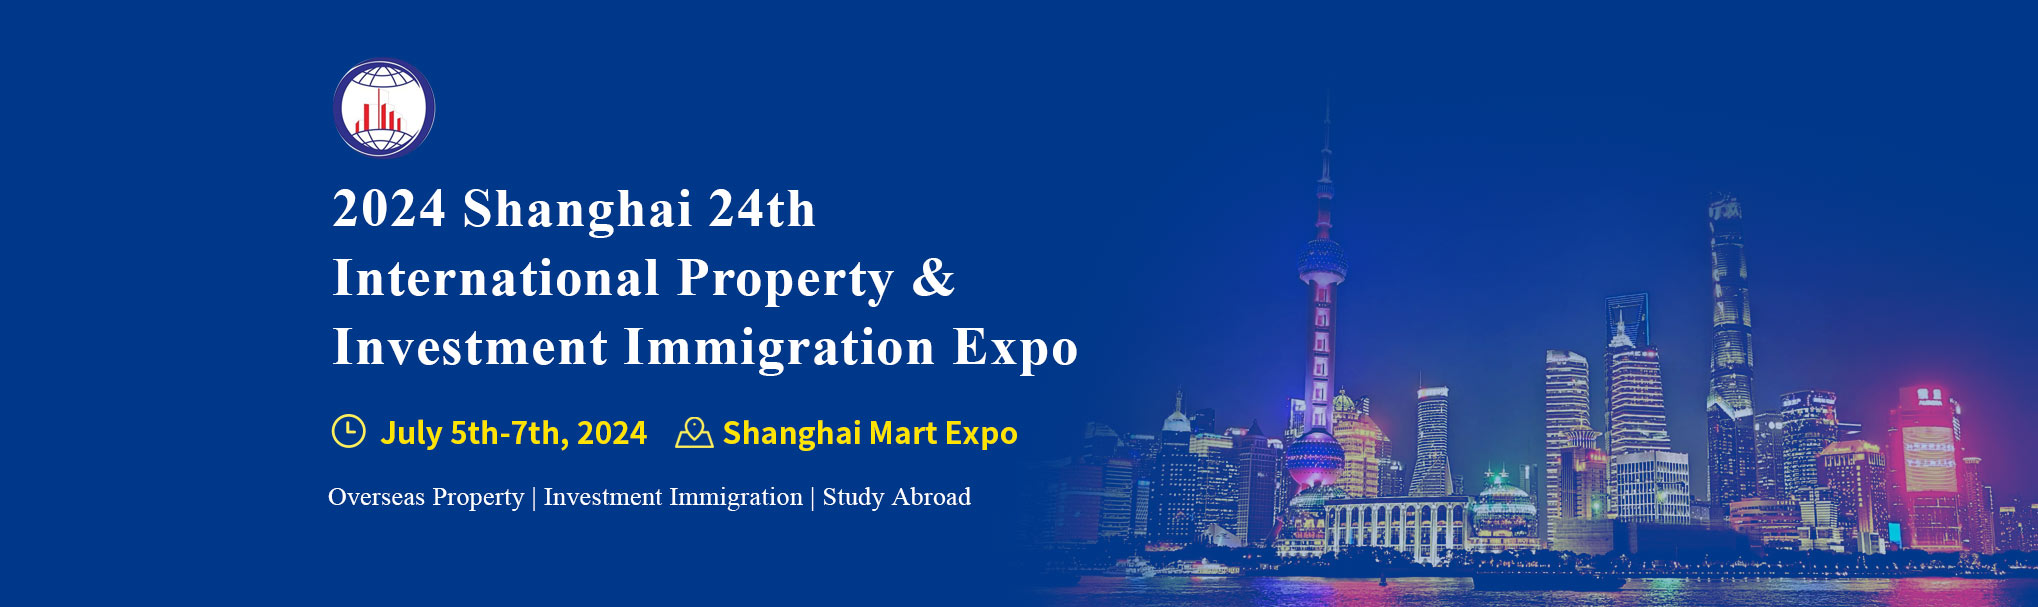 2024 Shanghai 24th International Property & Investment Immigration Expo